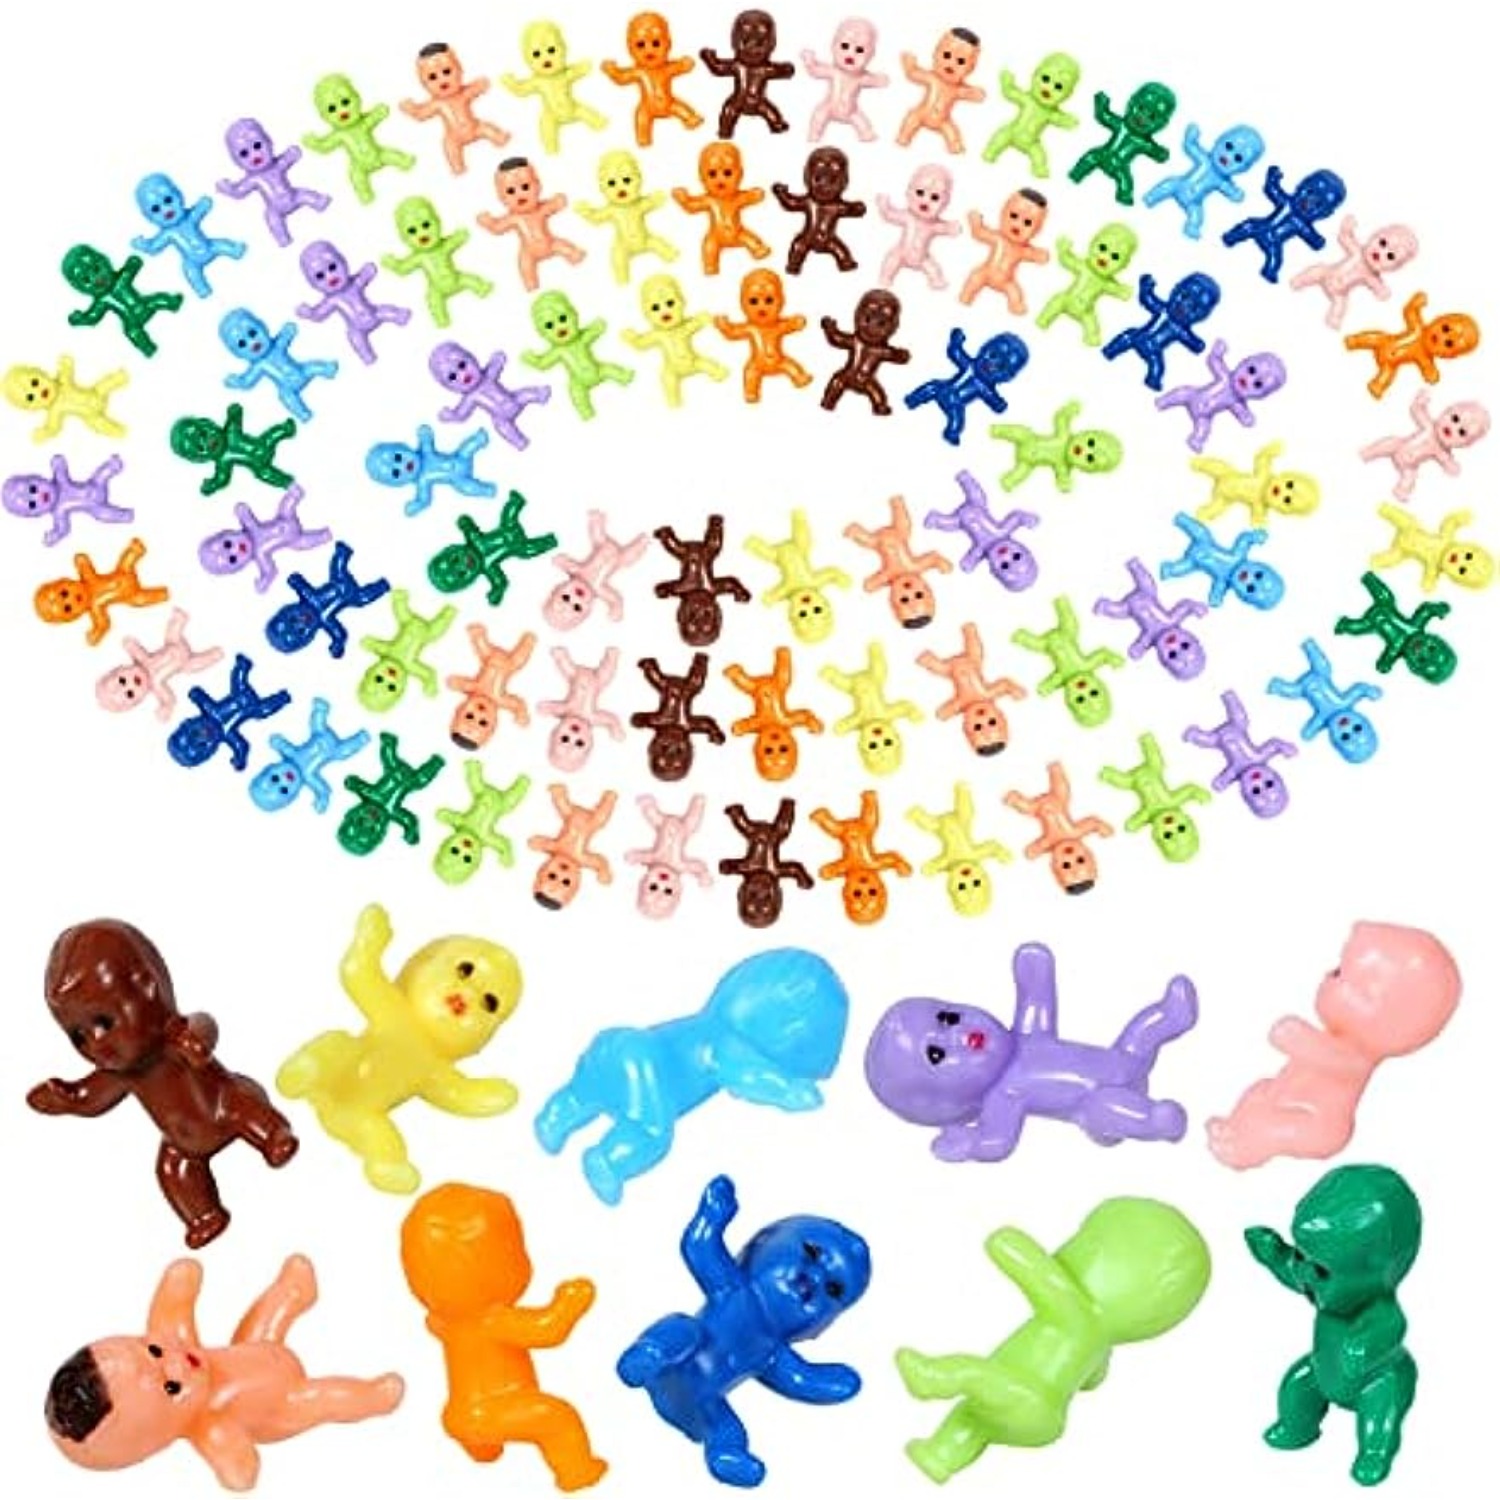 12pcs MINI PLASTIC BABIES All Skins Instant Collection Tiny Baby Dolls  Mardi Gras Mini Doll Shower Party Favors Toys Crafting Supply Lot